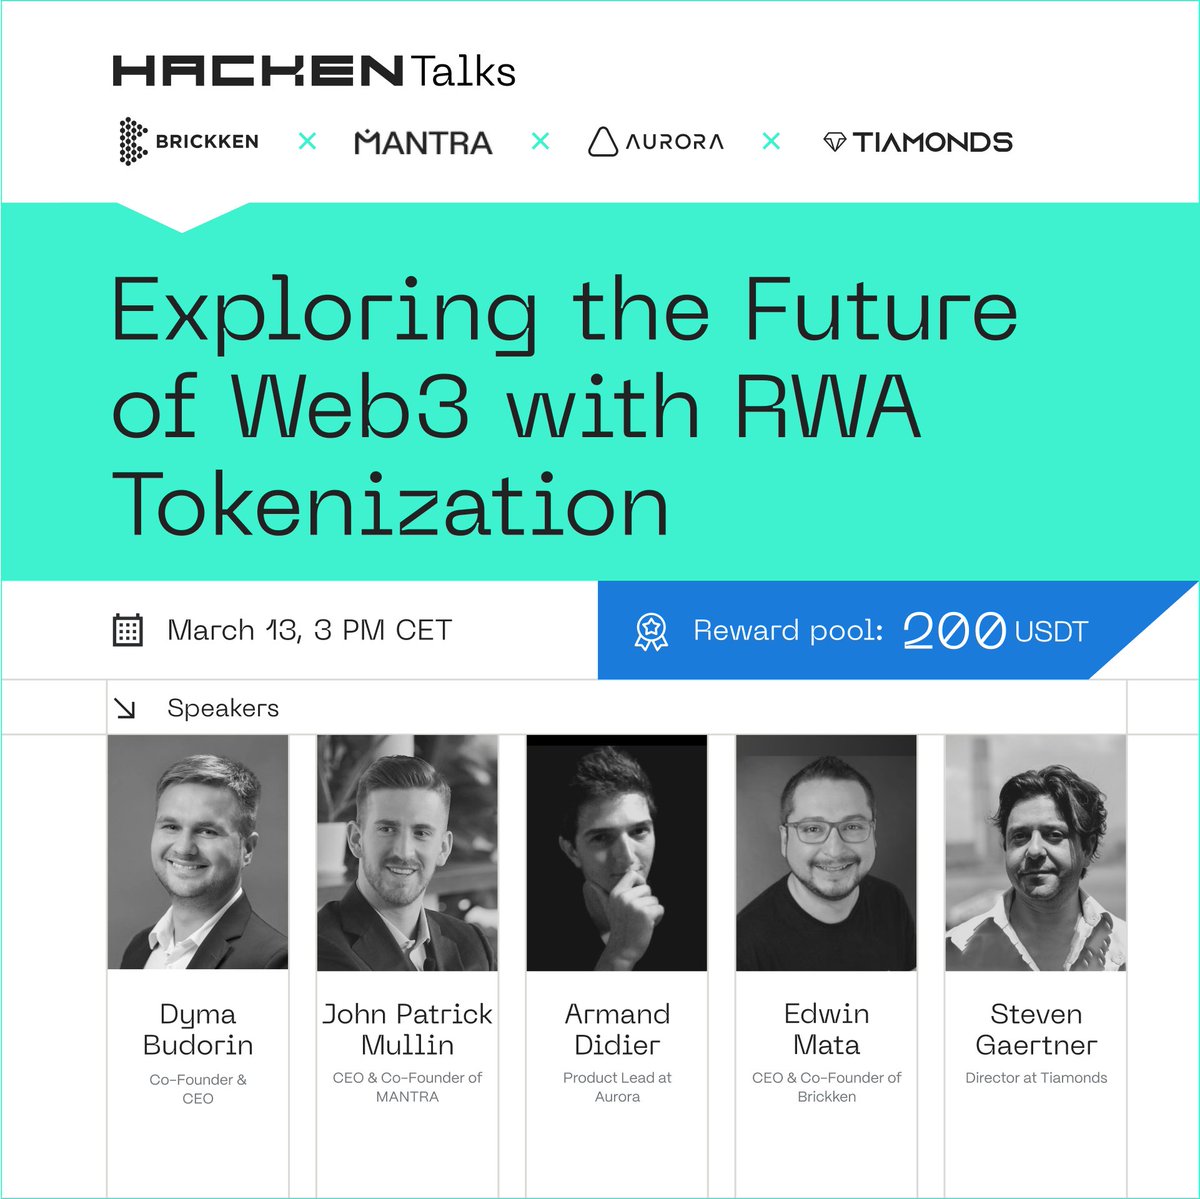 📣 Set your reminders for #HackenTalks tomorrow! We’re spotlighting our tokenization launch with insights on #RWA's pivotal role in Web3 from @buda_kyiv and leaders from @MANTRA_Chain, @auroraisnear, @Brickken & @Tiamonds twitter.com/i/spaces/1ypKd…